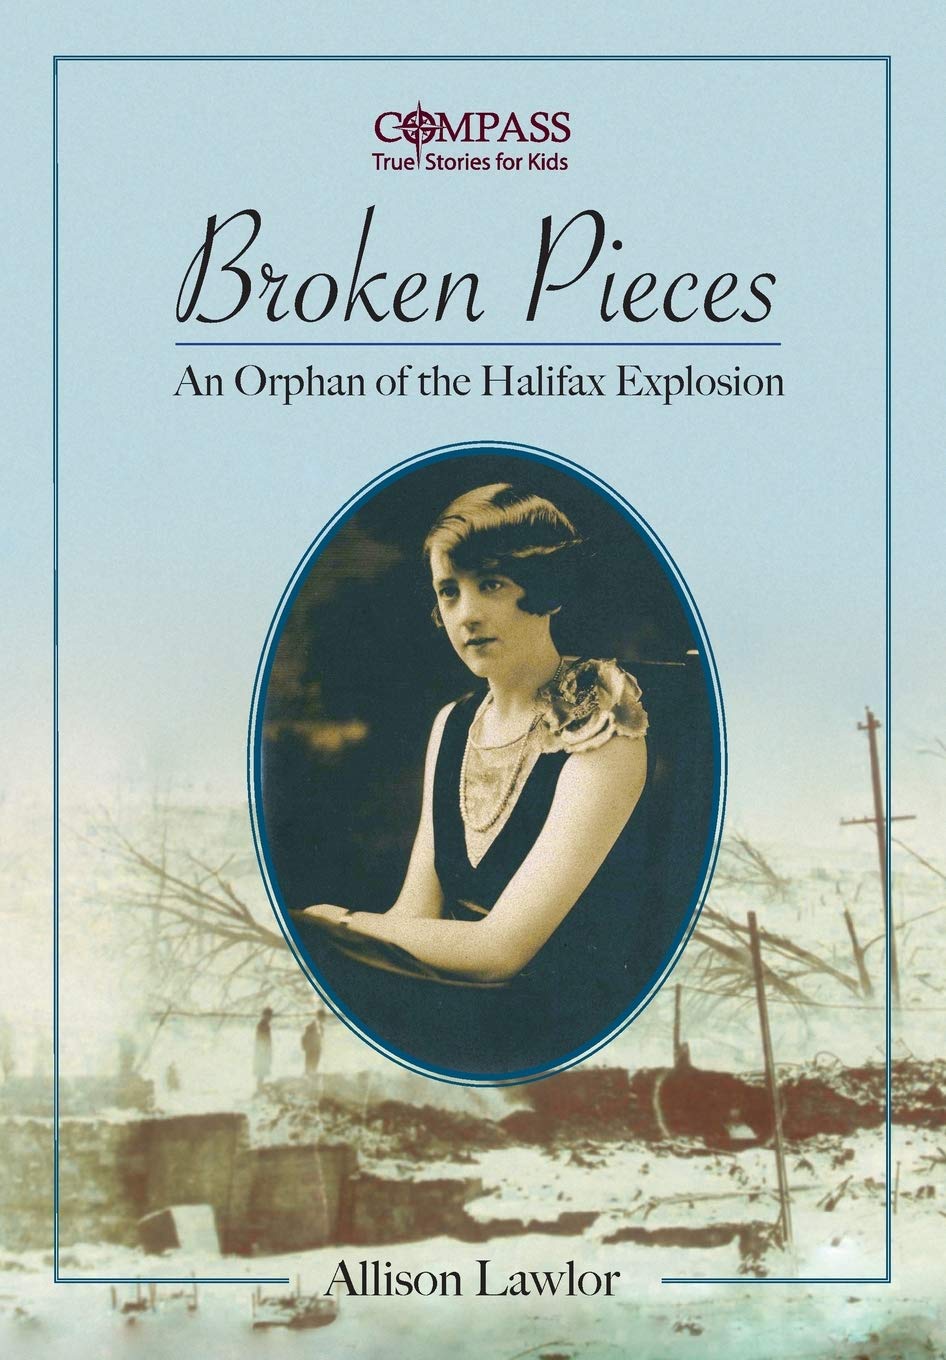 Broken Pieces: An Orphan of the Halifax Explosion (Compass series) by Allison Lawlor